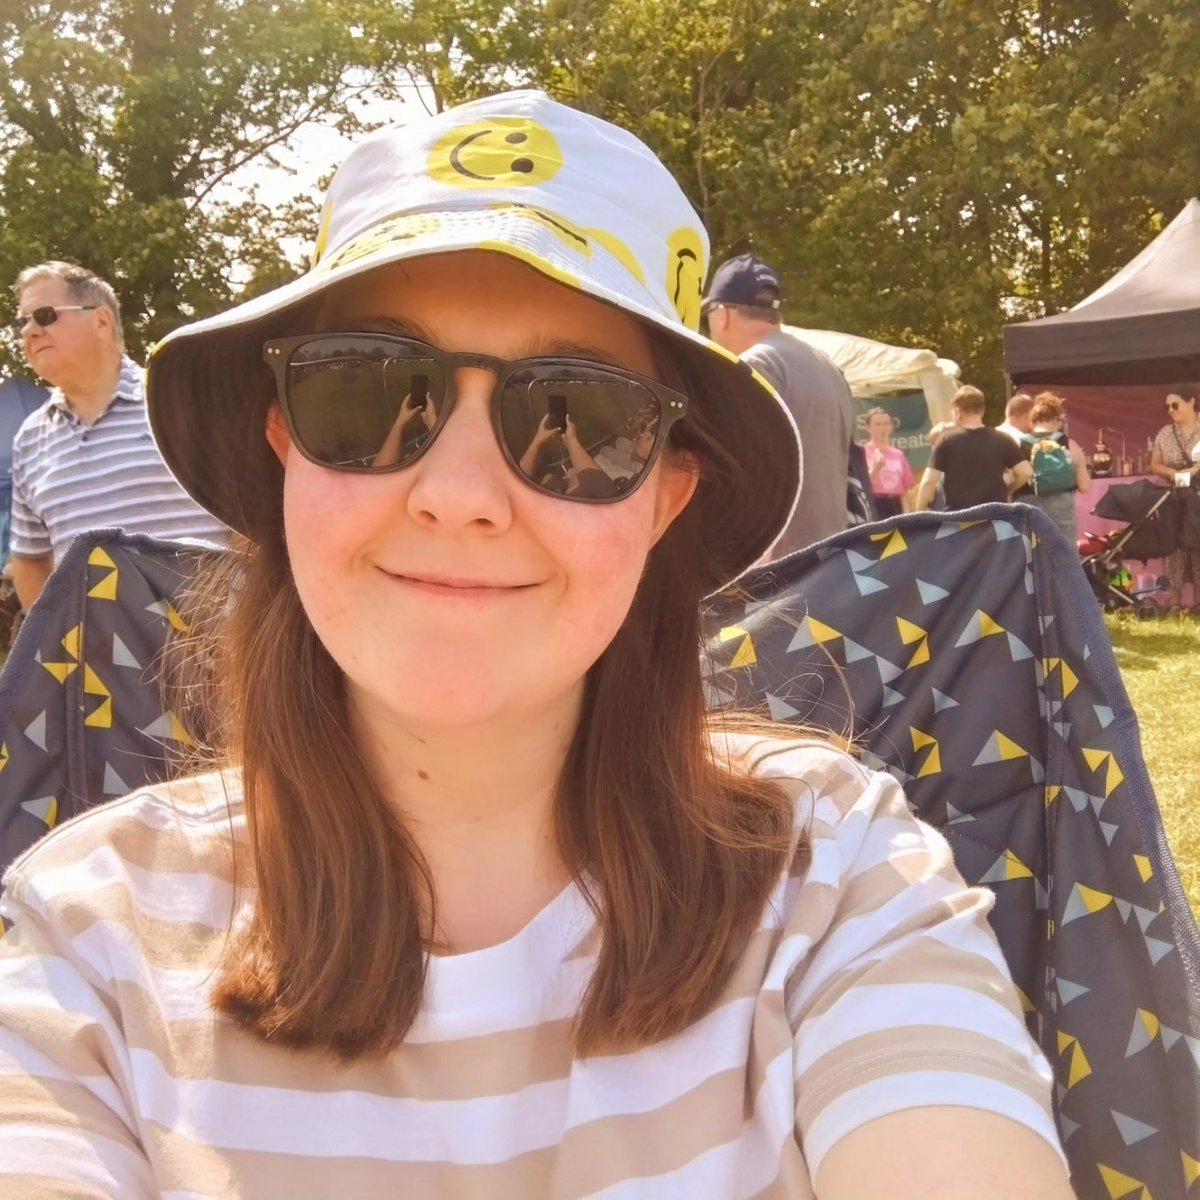 Had a fun day in the sunshine at the #StotfoldSteamFair yesterday! 🌞🚂🚜🏍️

#photography #steamfair #countryshow #tractionengines #steamengines #classiccars #tractors #vintagetractors #stunts #family #familytime #familydayout #stotfold #stotfoldmill #stotfoldwatermill #selfie